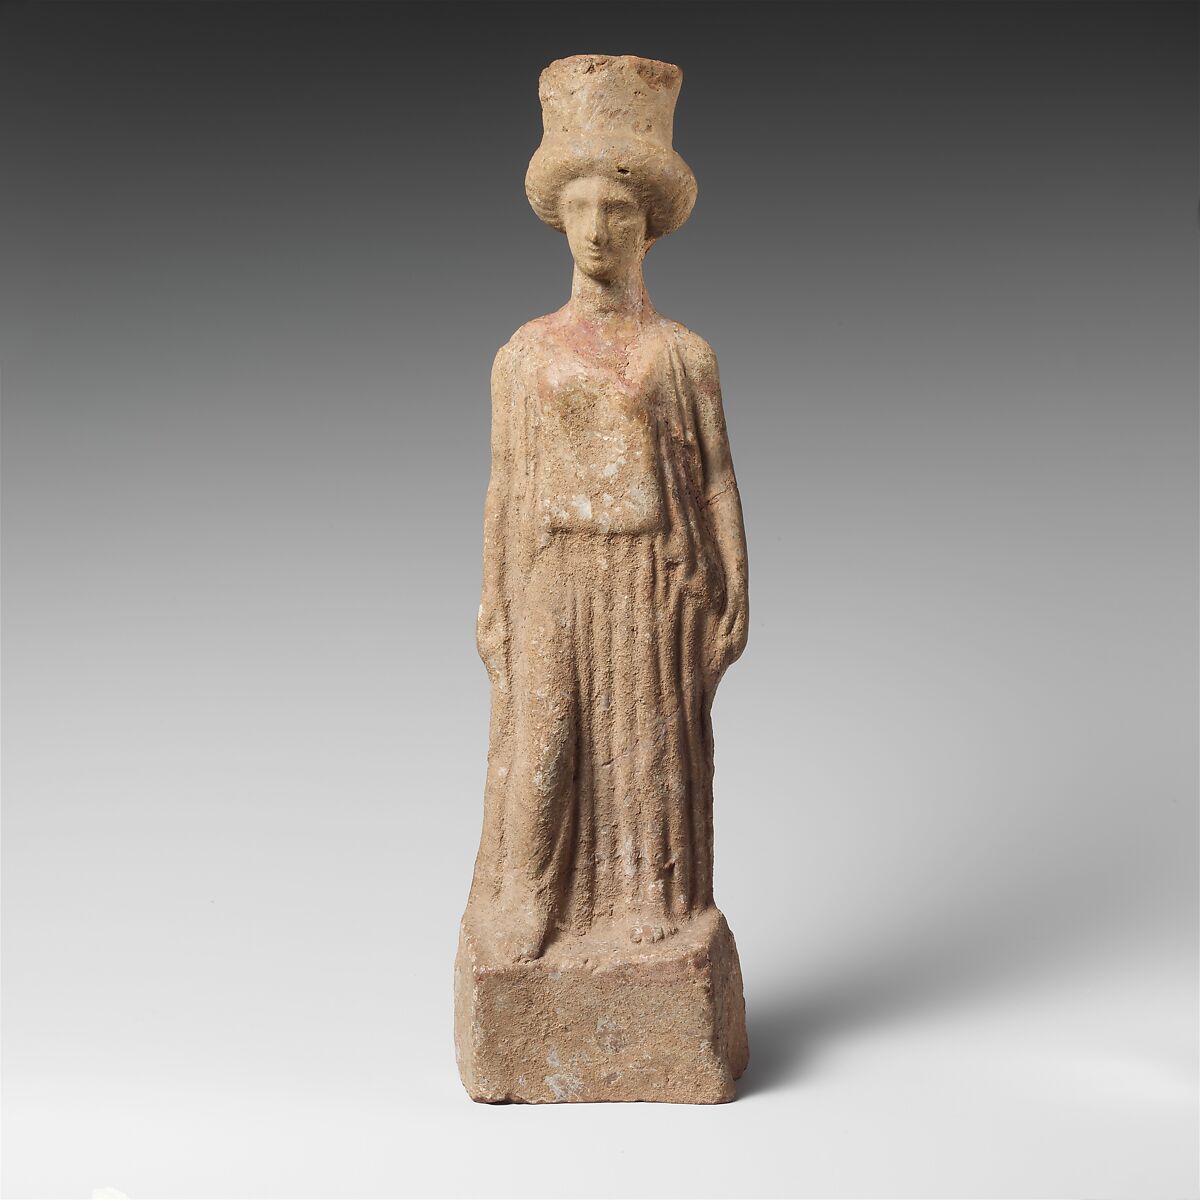 Terracotta statuette of a standing woman, Terracotta
Fabric: (figurine is too dirty to read fabric).
Slip, paint: white slip, red paint on chest.
Method of manufacture: moldmade, hollow; head also hollow, molded separately. Base in one mold with torso.
Back, venting: back handmade, flattened. Very large rectangular ("open door") vent from chest to base., Greek, Boeotian 